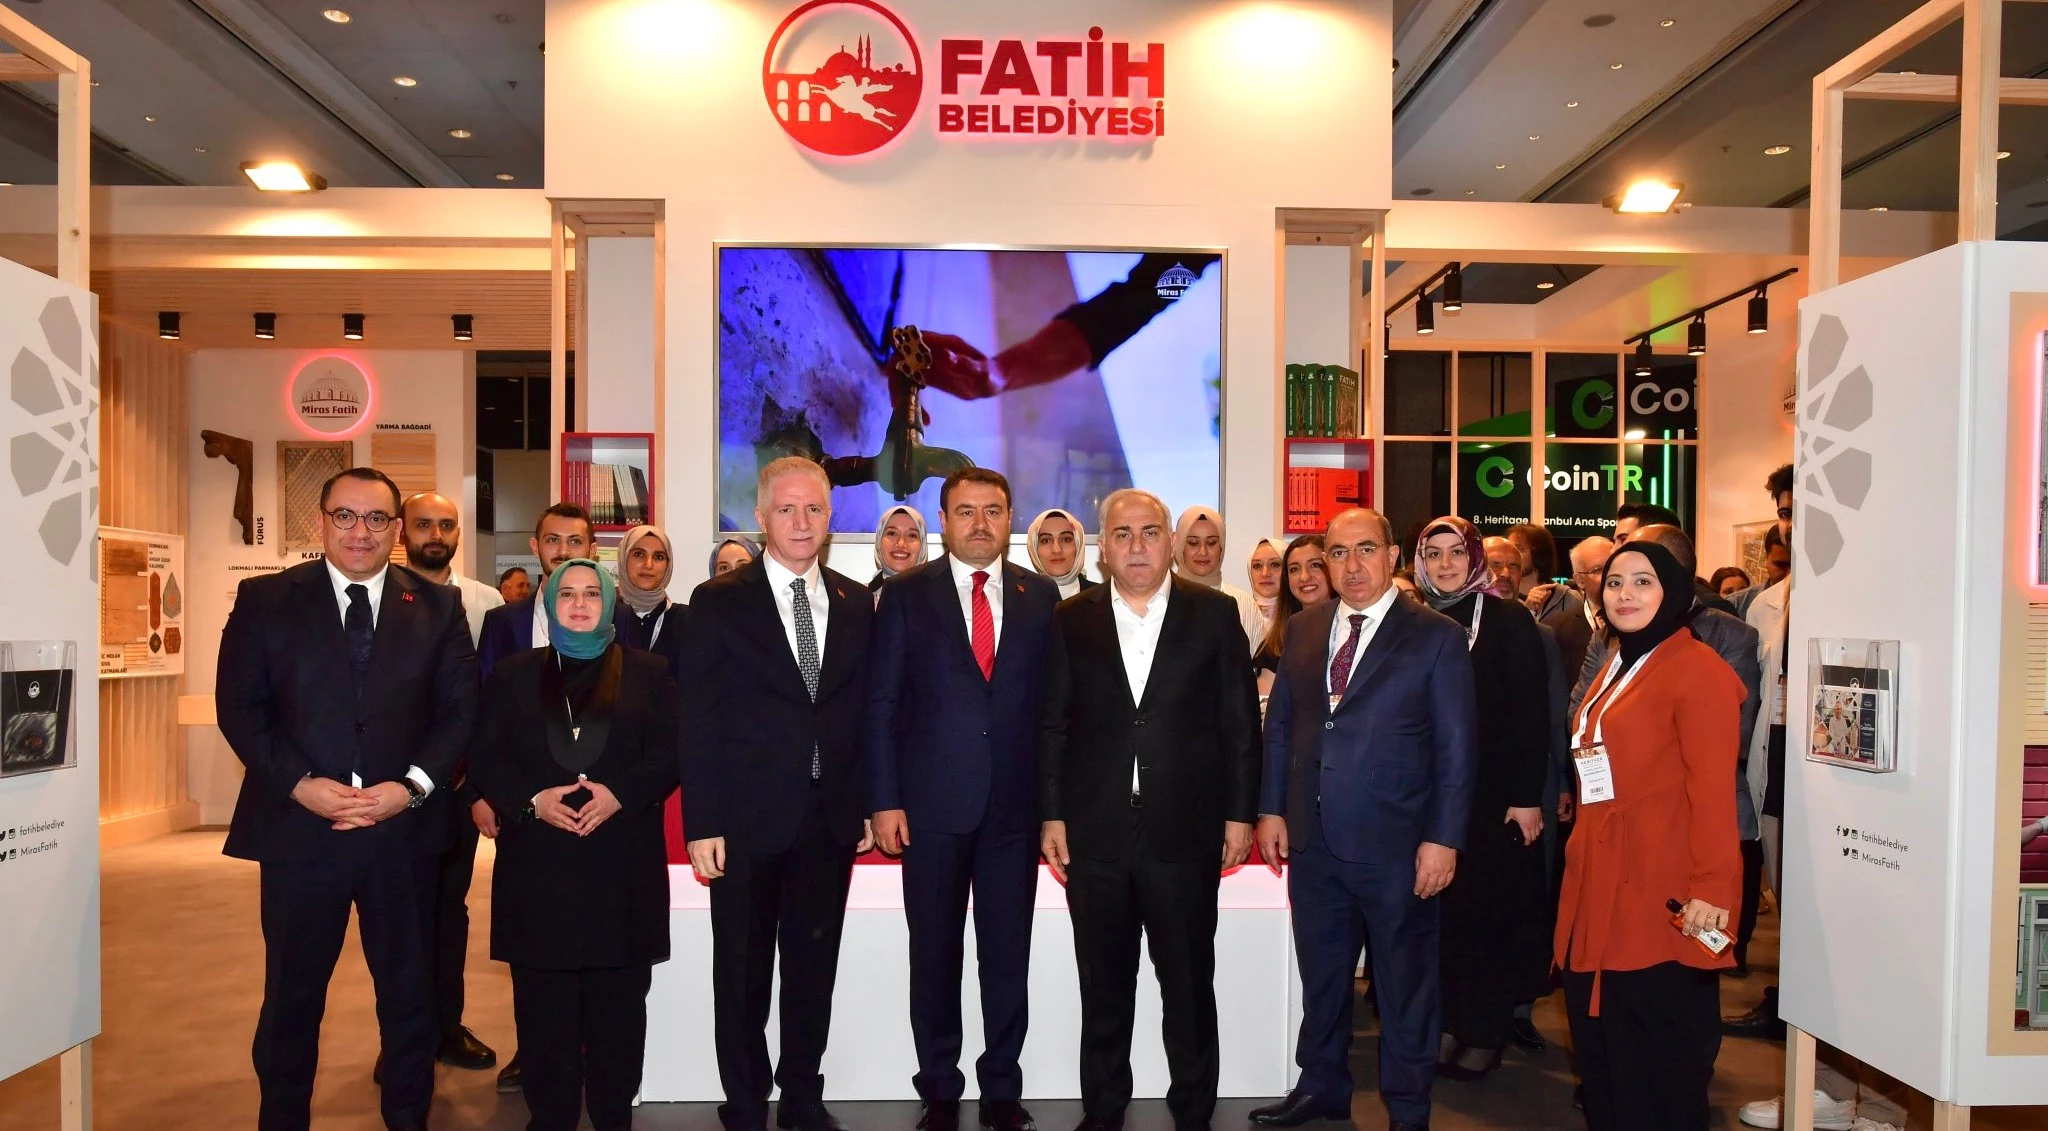 We Participated in the 8th Heritage İstanbul Fair as Fatih Municipality